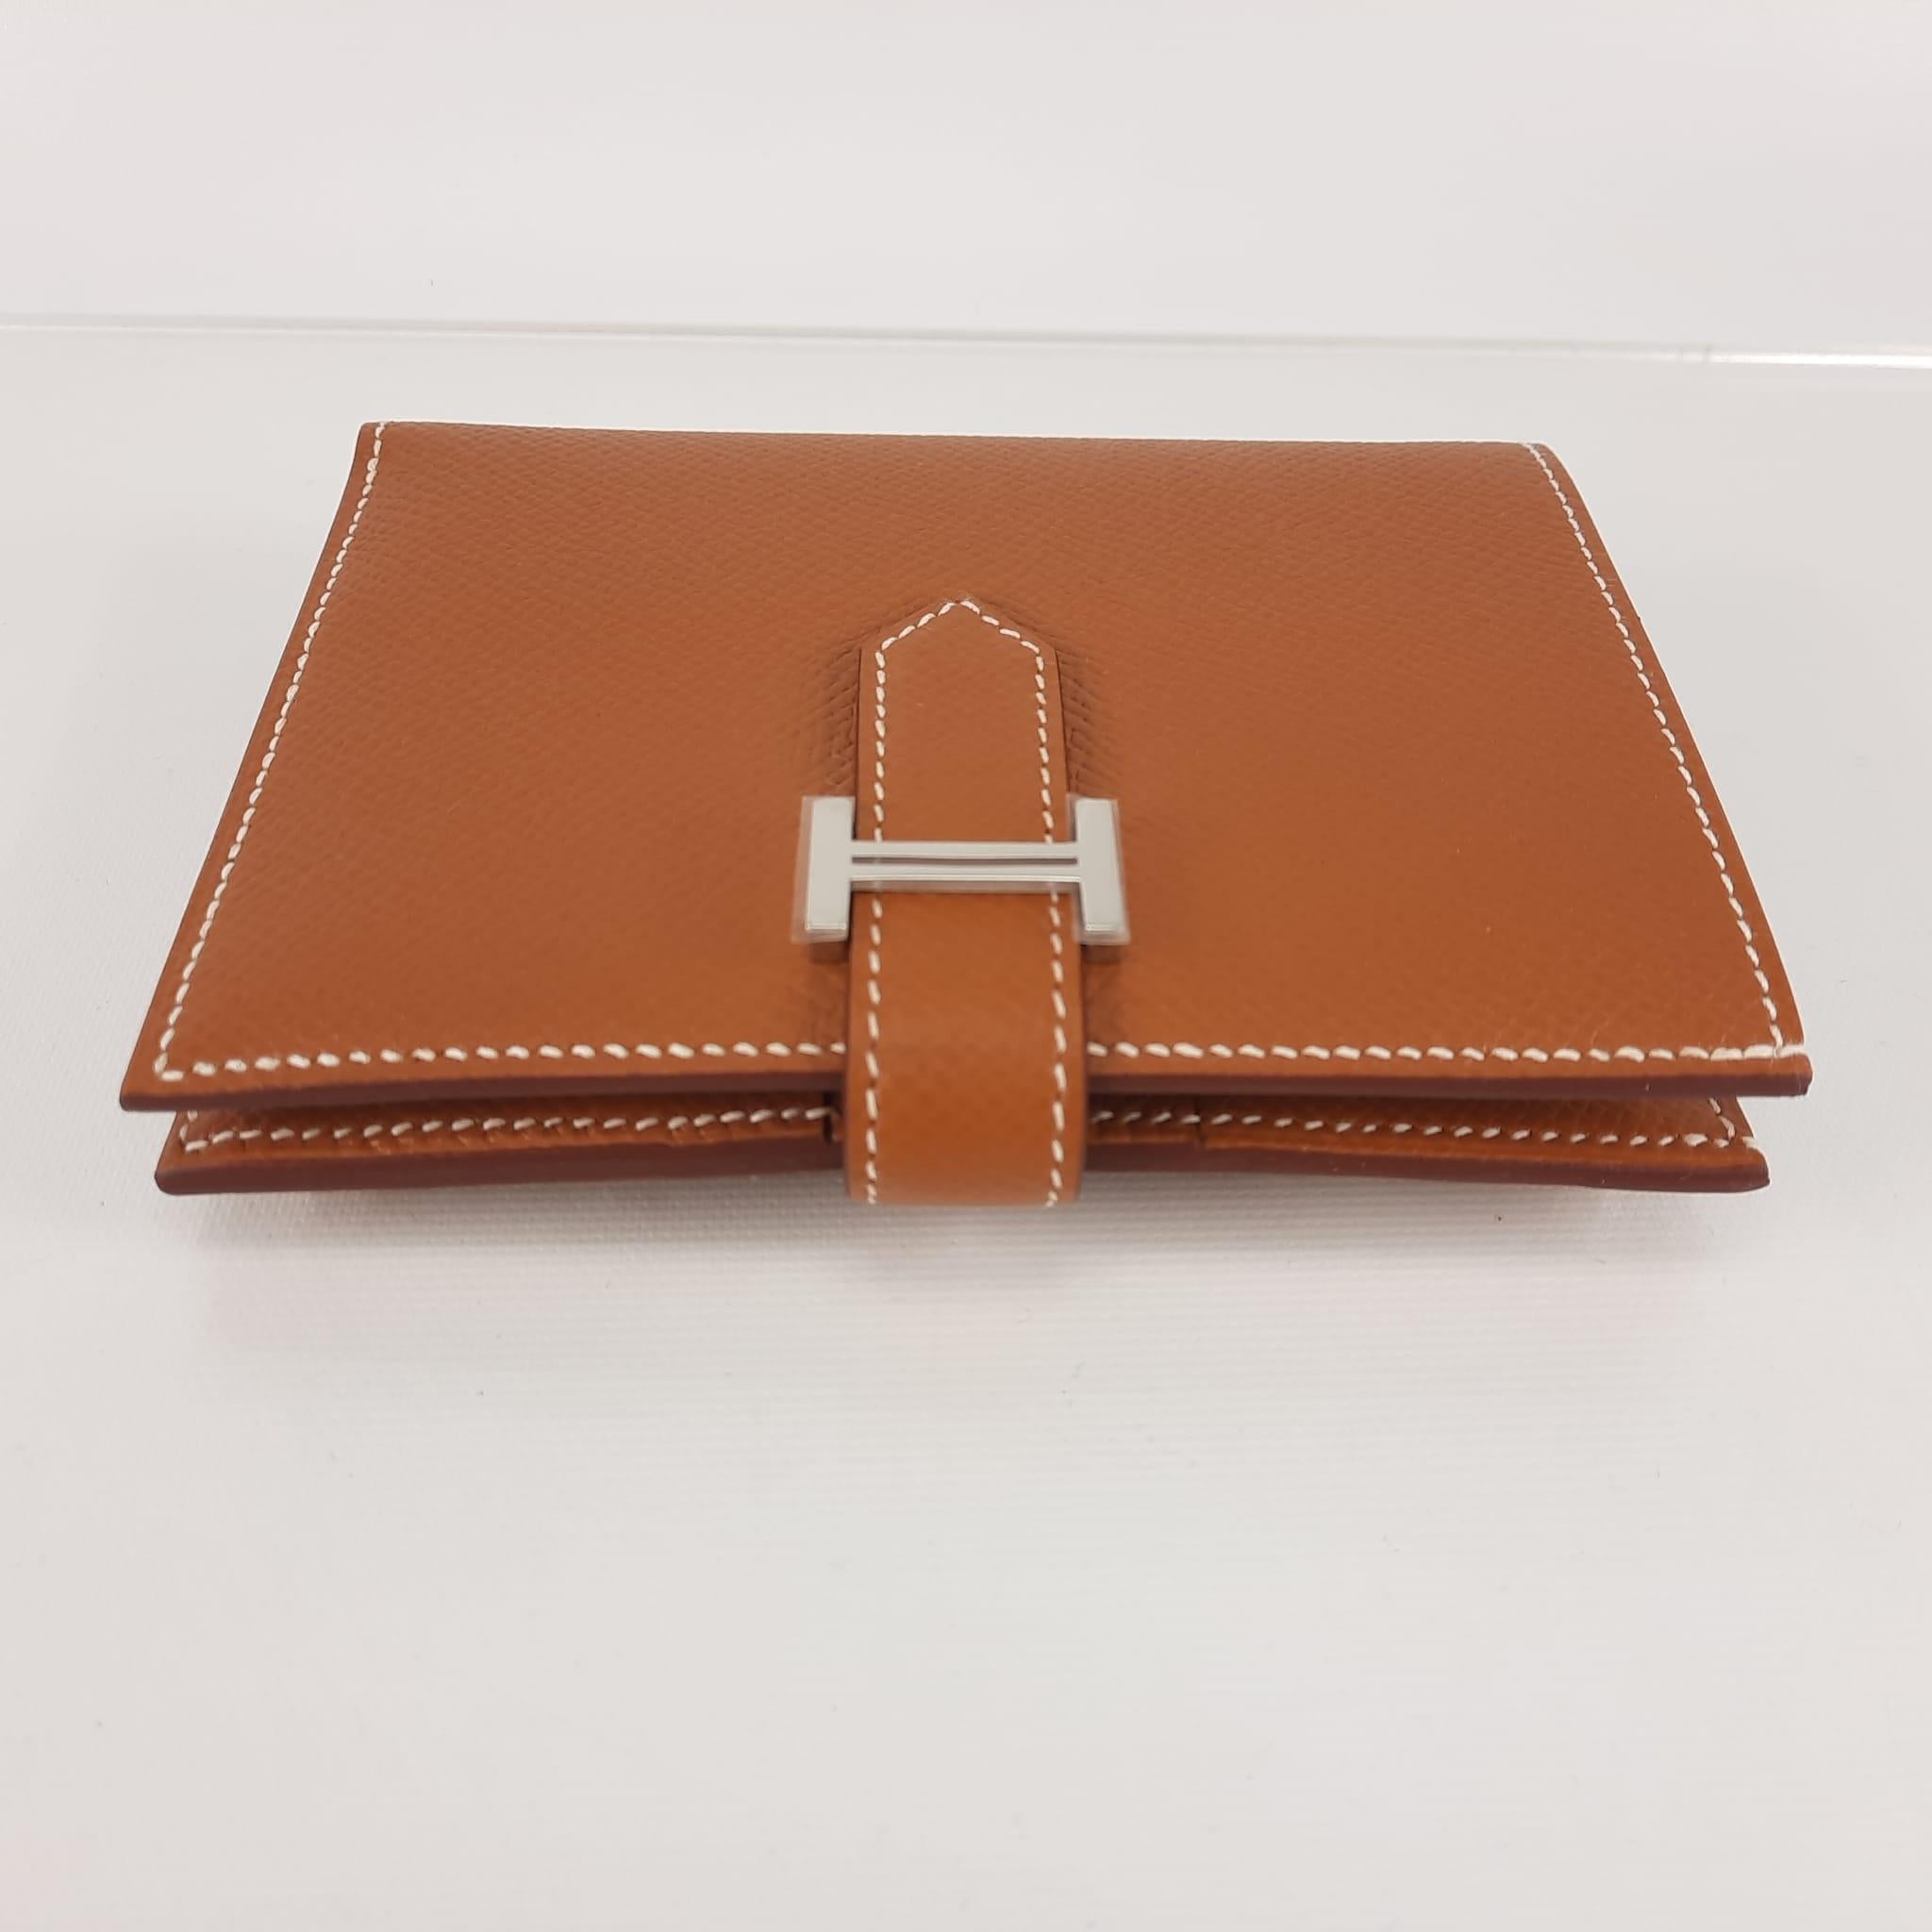 Compact wallet in Epsom calfskin with 4 credit card slots, 4 pockets, zipped change purse, 1 bill pocket and palladium-plated 'H' tab closure
Made in France
Dimensions: L 12 x H 9.5 x D 0.4 cm